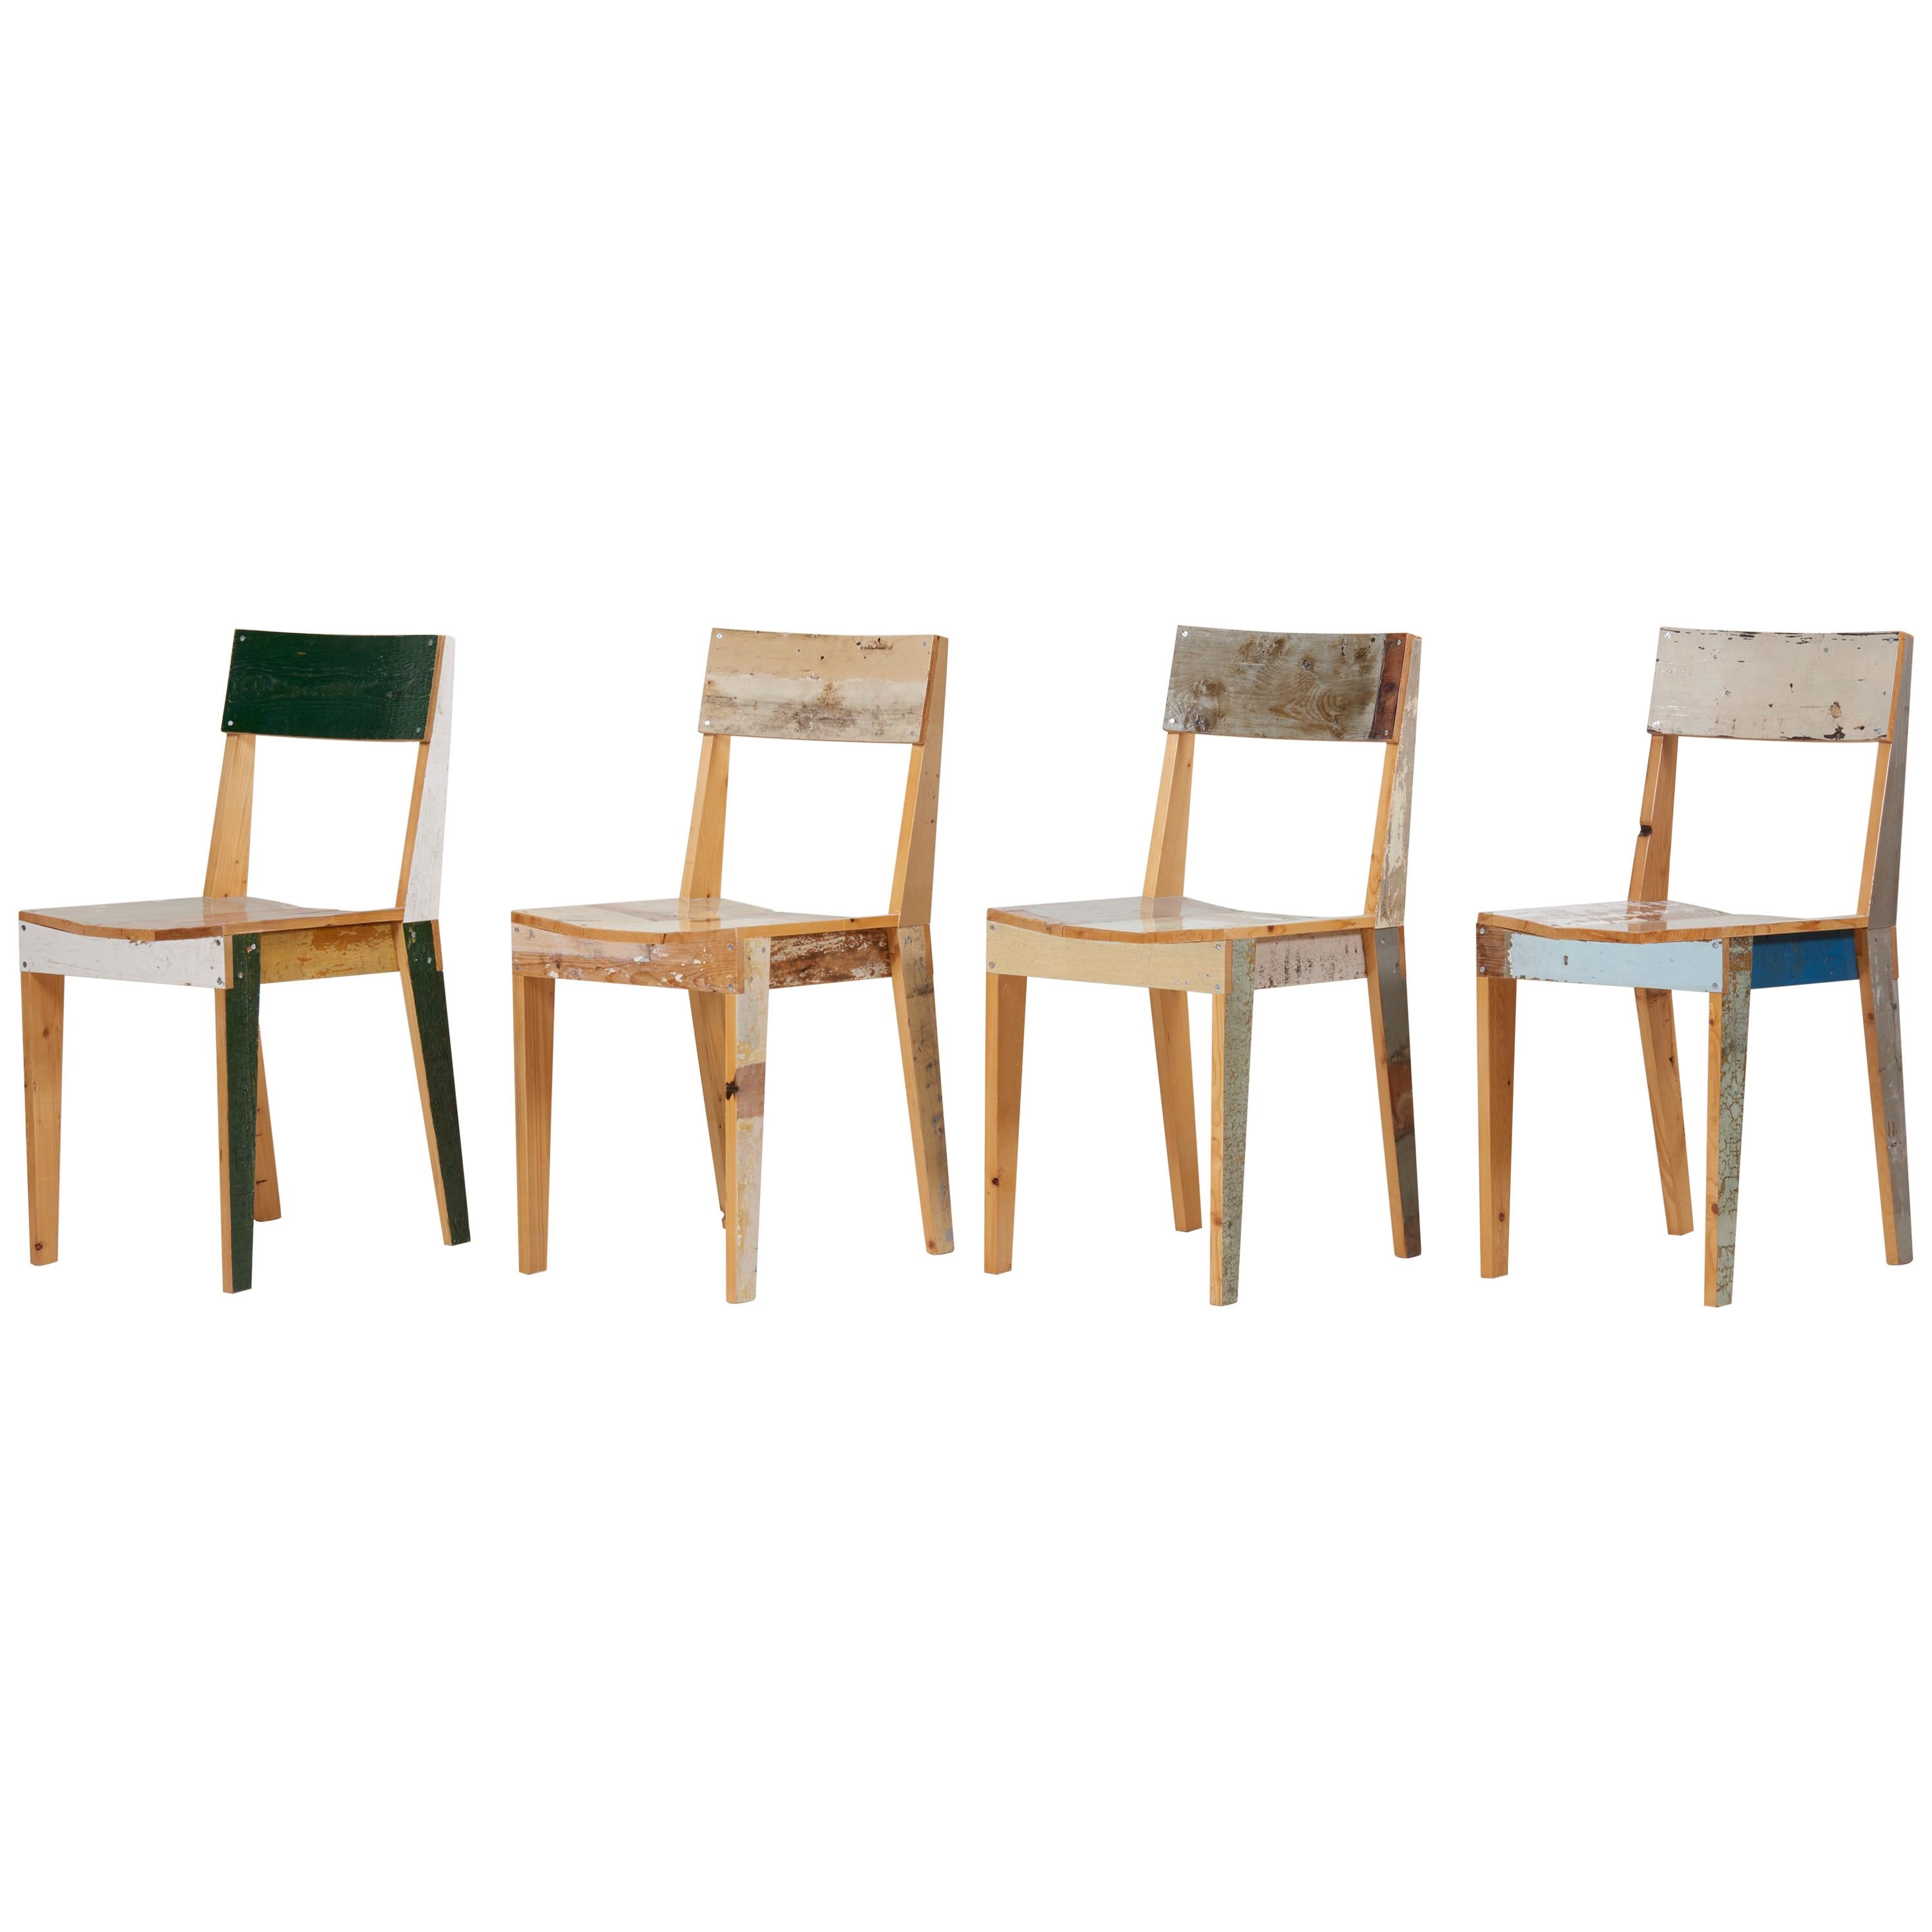 Set of Four Lacquered Oak Chairs in Scrapwood by Piet Hein Eek